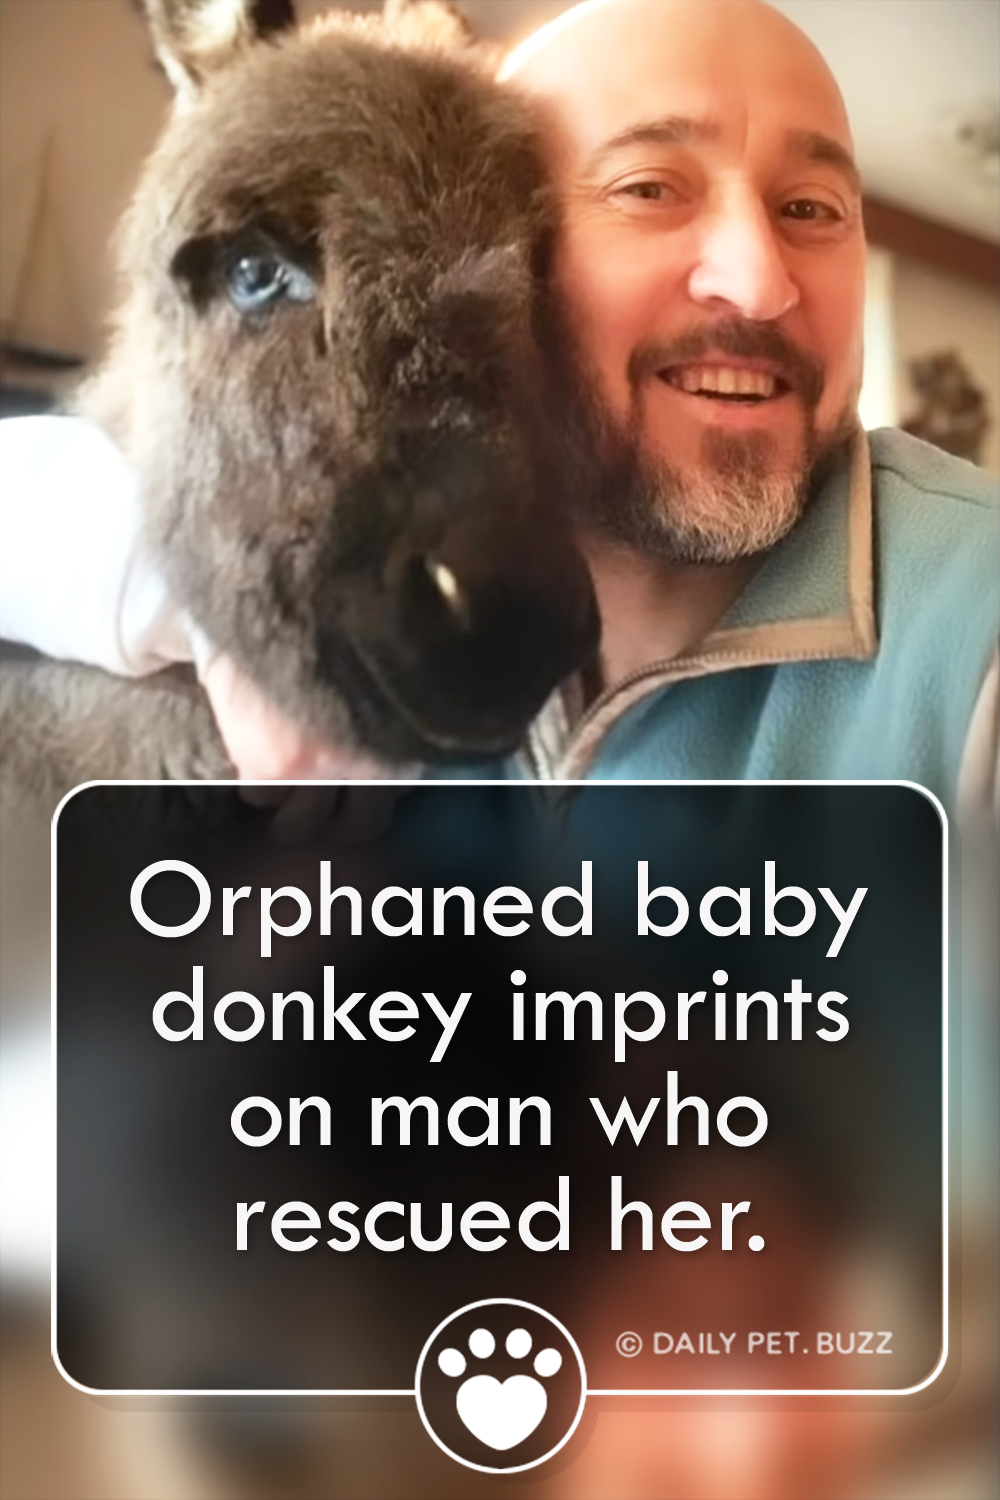 Orphaned baby donkey imprints on man who rescued her.